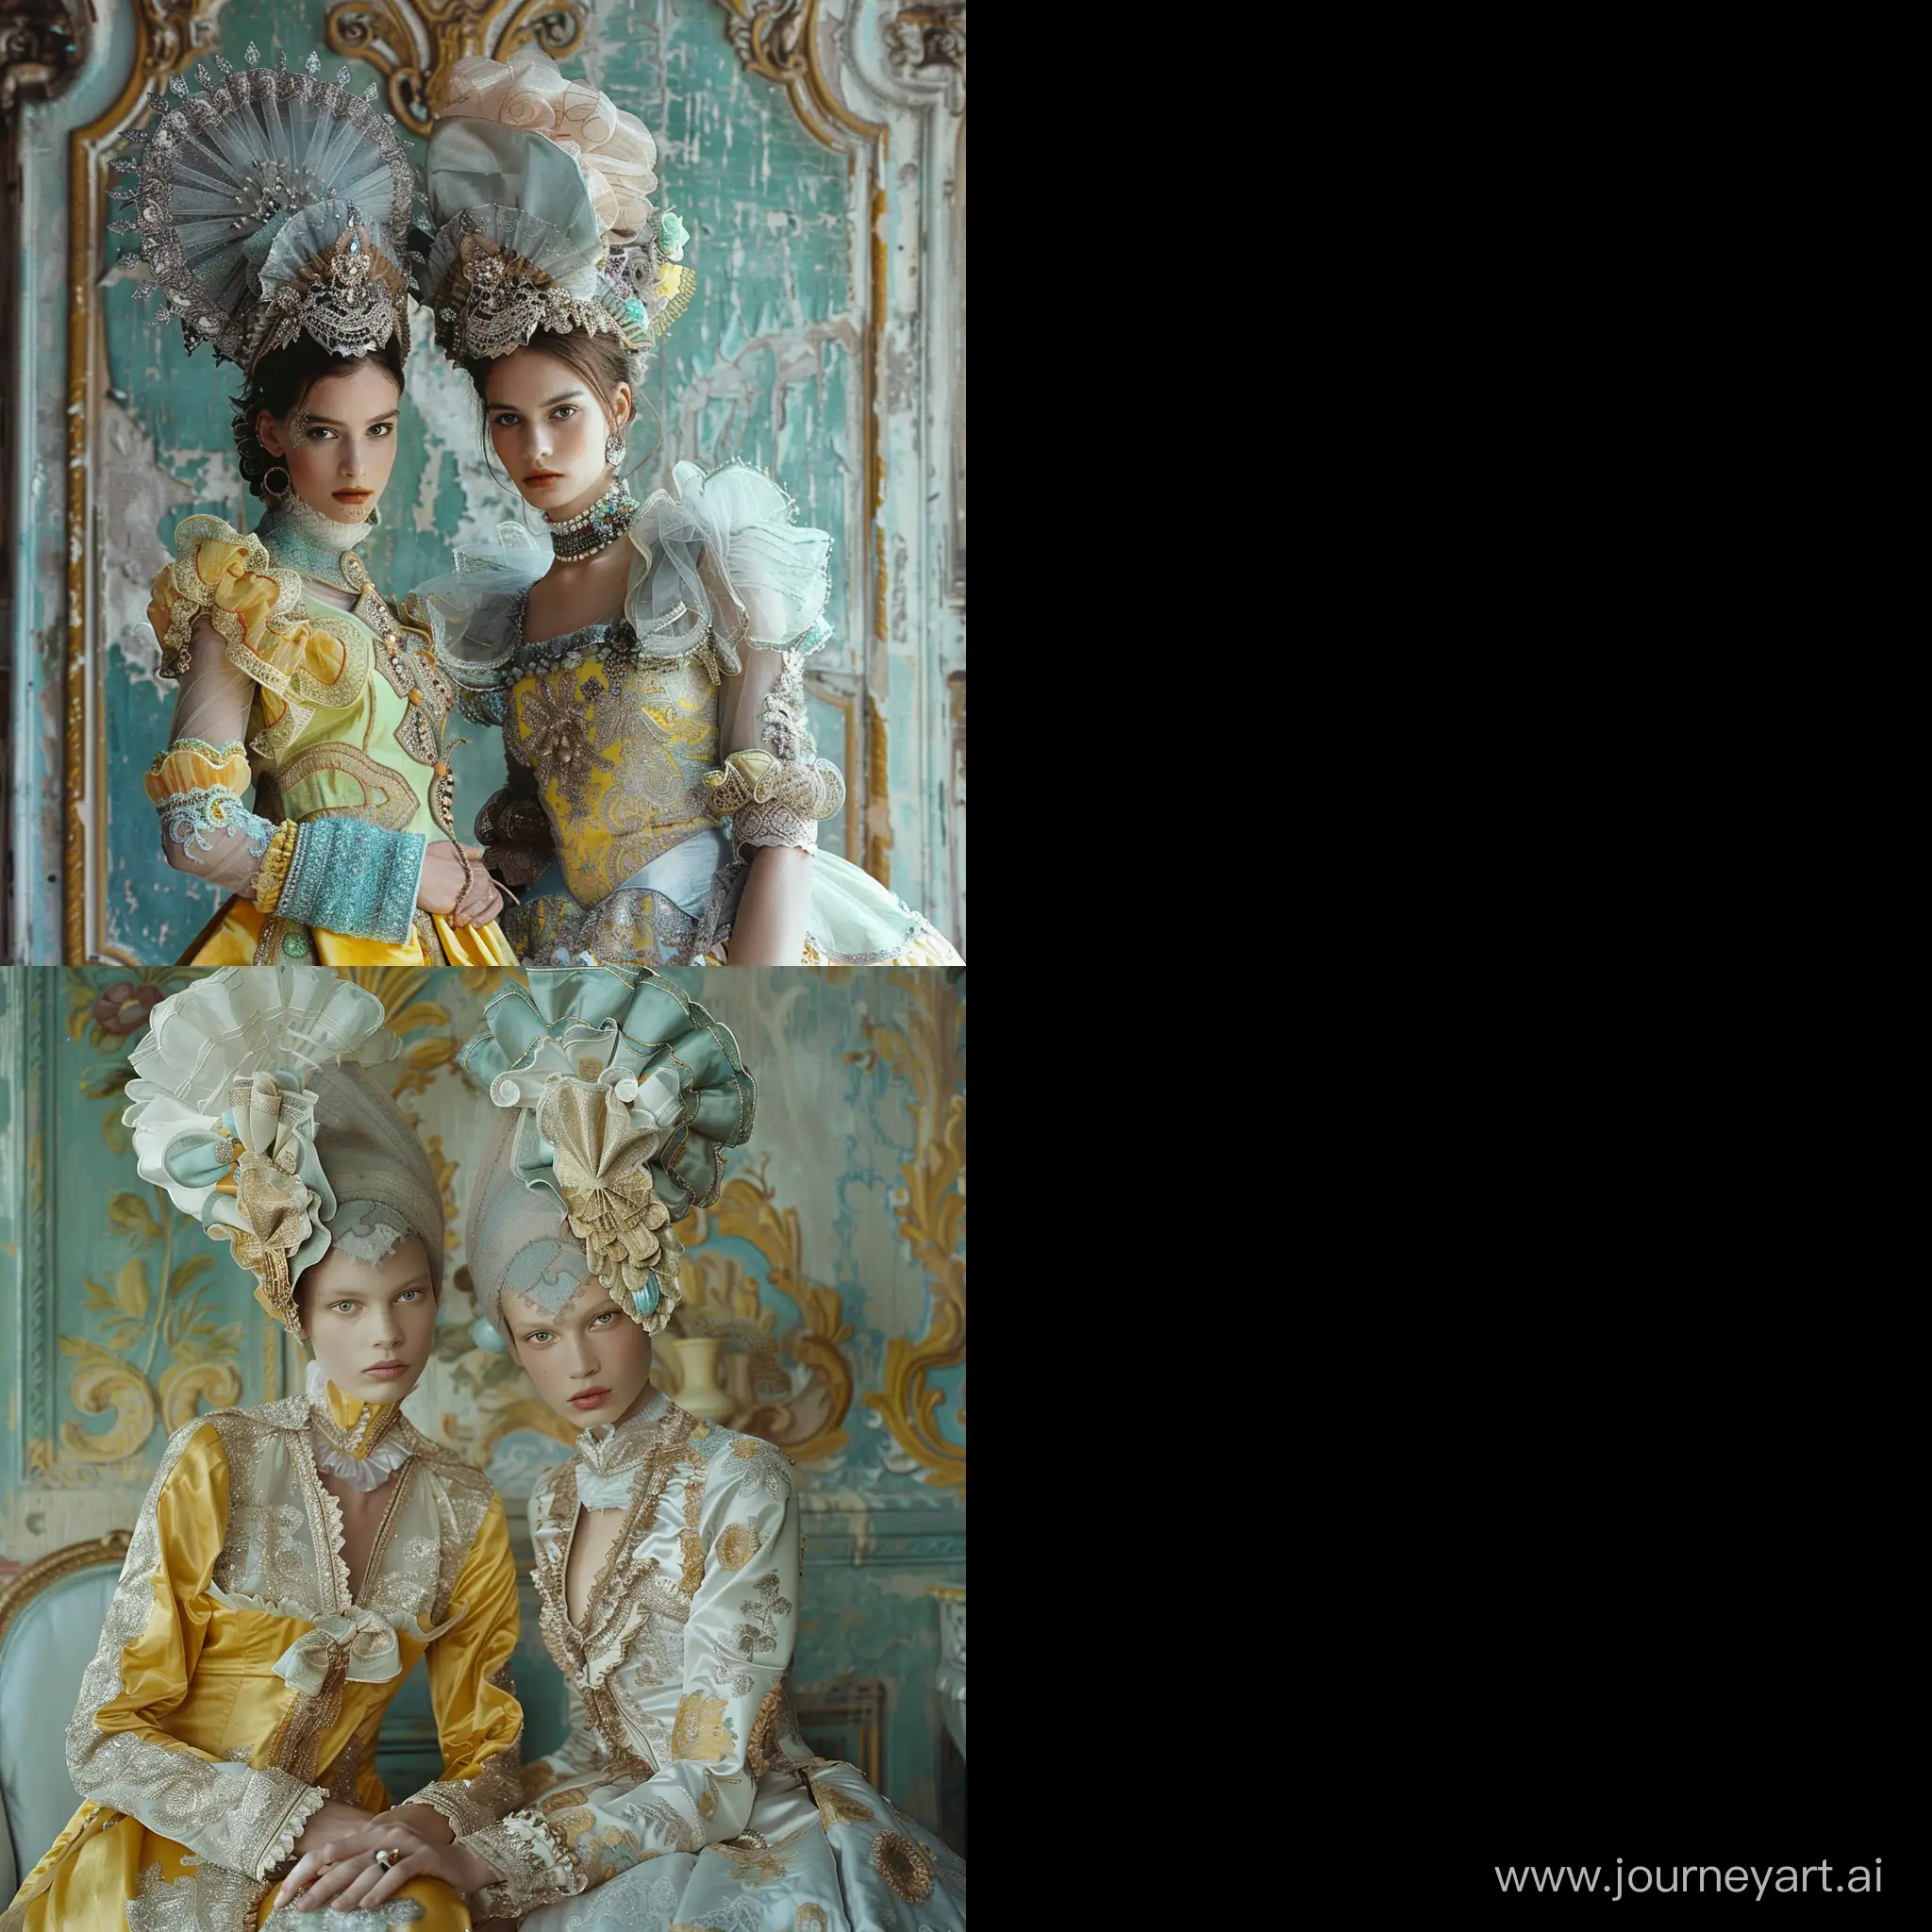 raffaella guissio in jul 2012 eliz raffaellas and güelly for vogue, in the style of chen zhen, bronze and aquamarine, eccentric detail placements, vintage charm, focus stacking, light silver and yellow, old-world charm